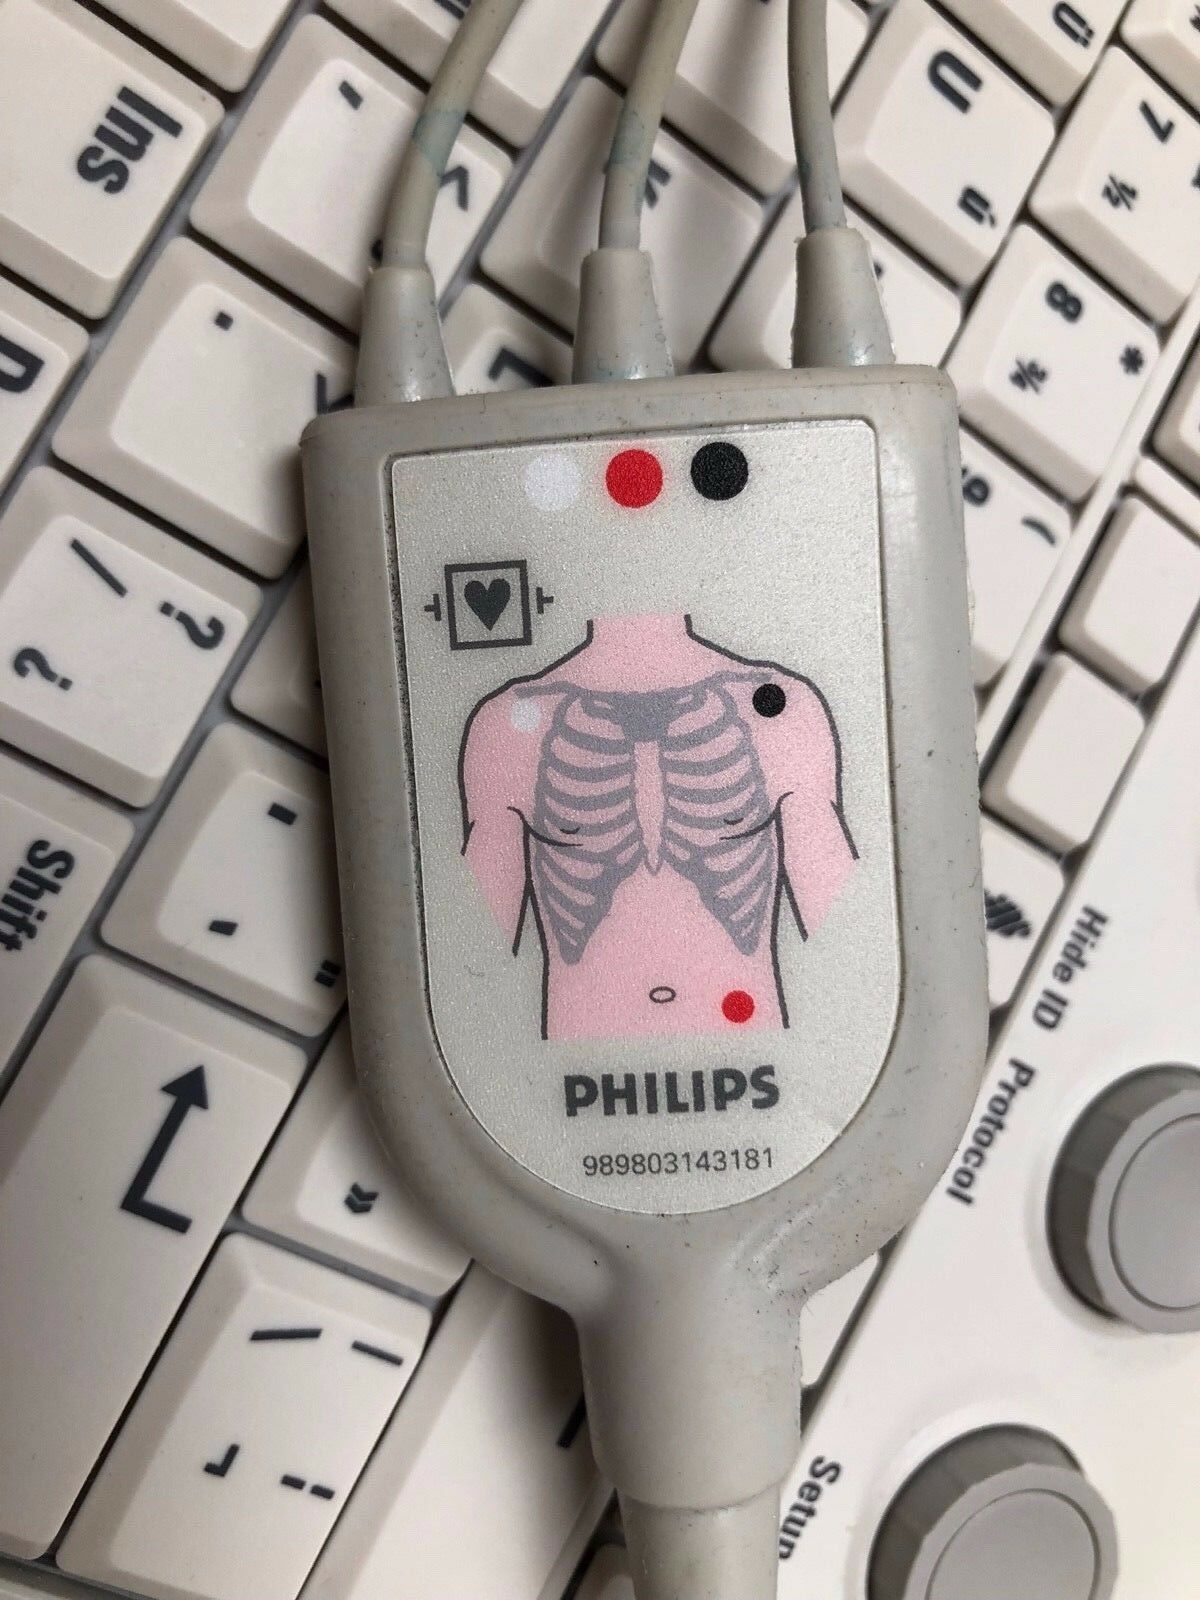 Philips CX50 Cardiac Vascular Abdominal Ultrasound S5-1, C5-1, L12-3 Available DIAGNOSTIC ULTRASOUND MACHINES FOR SALE